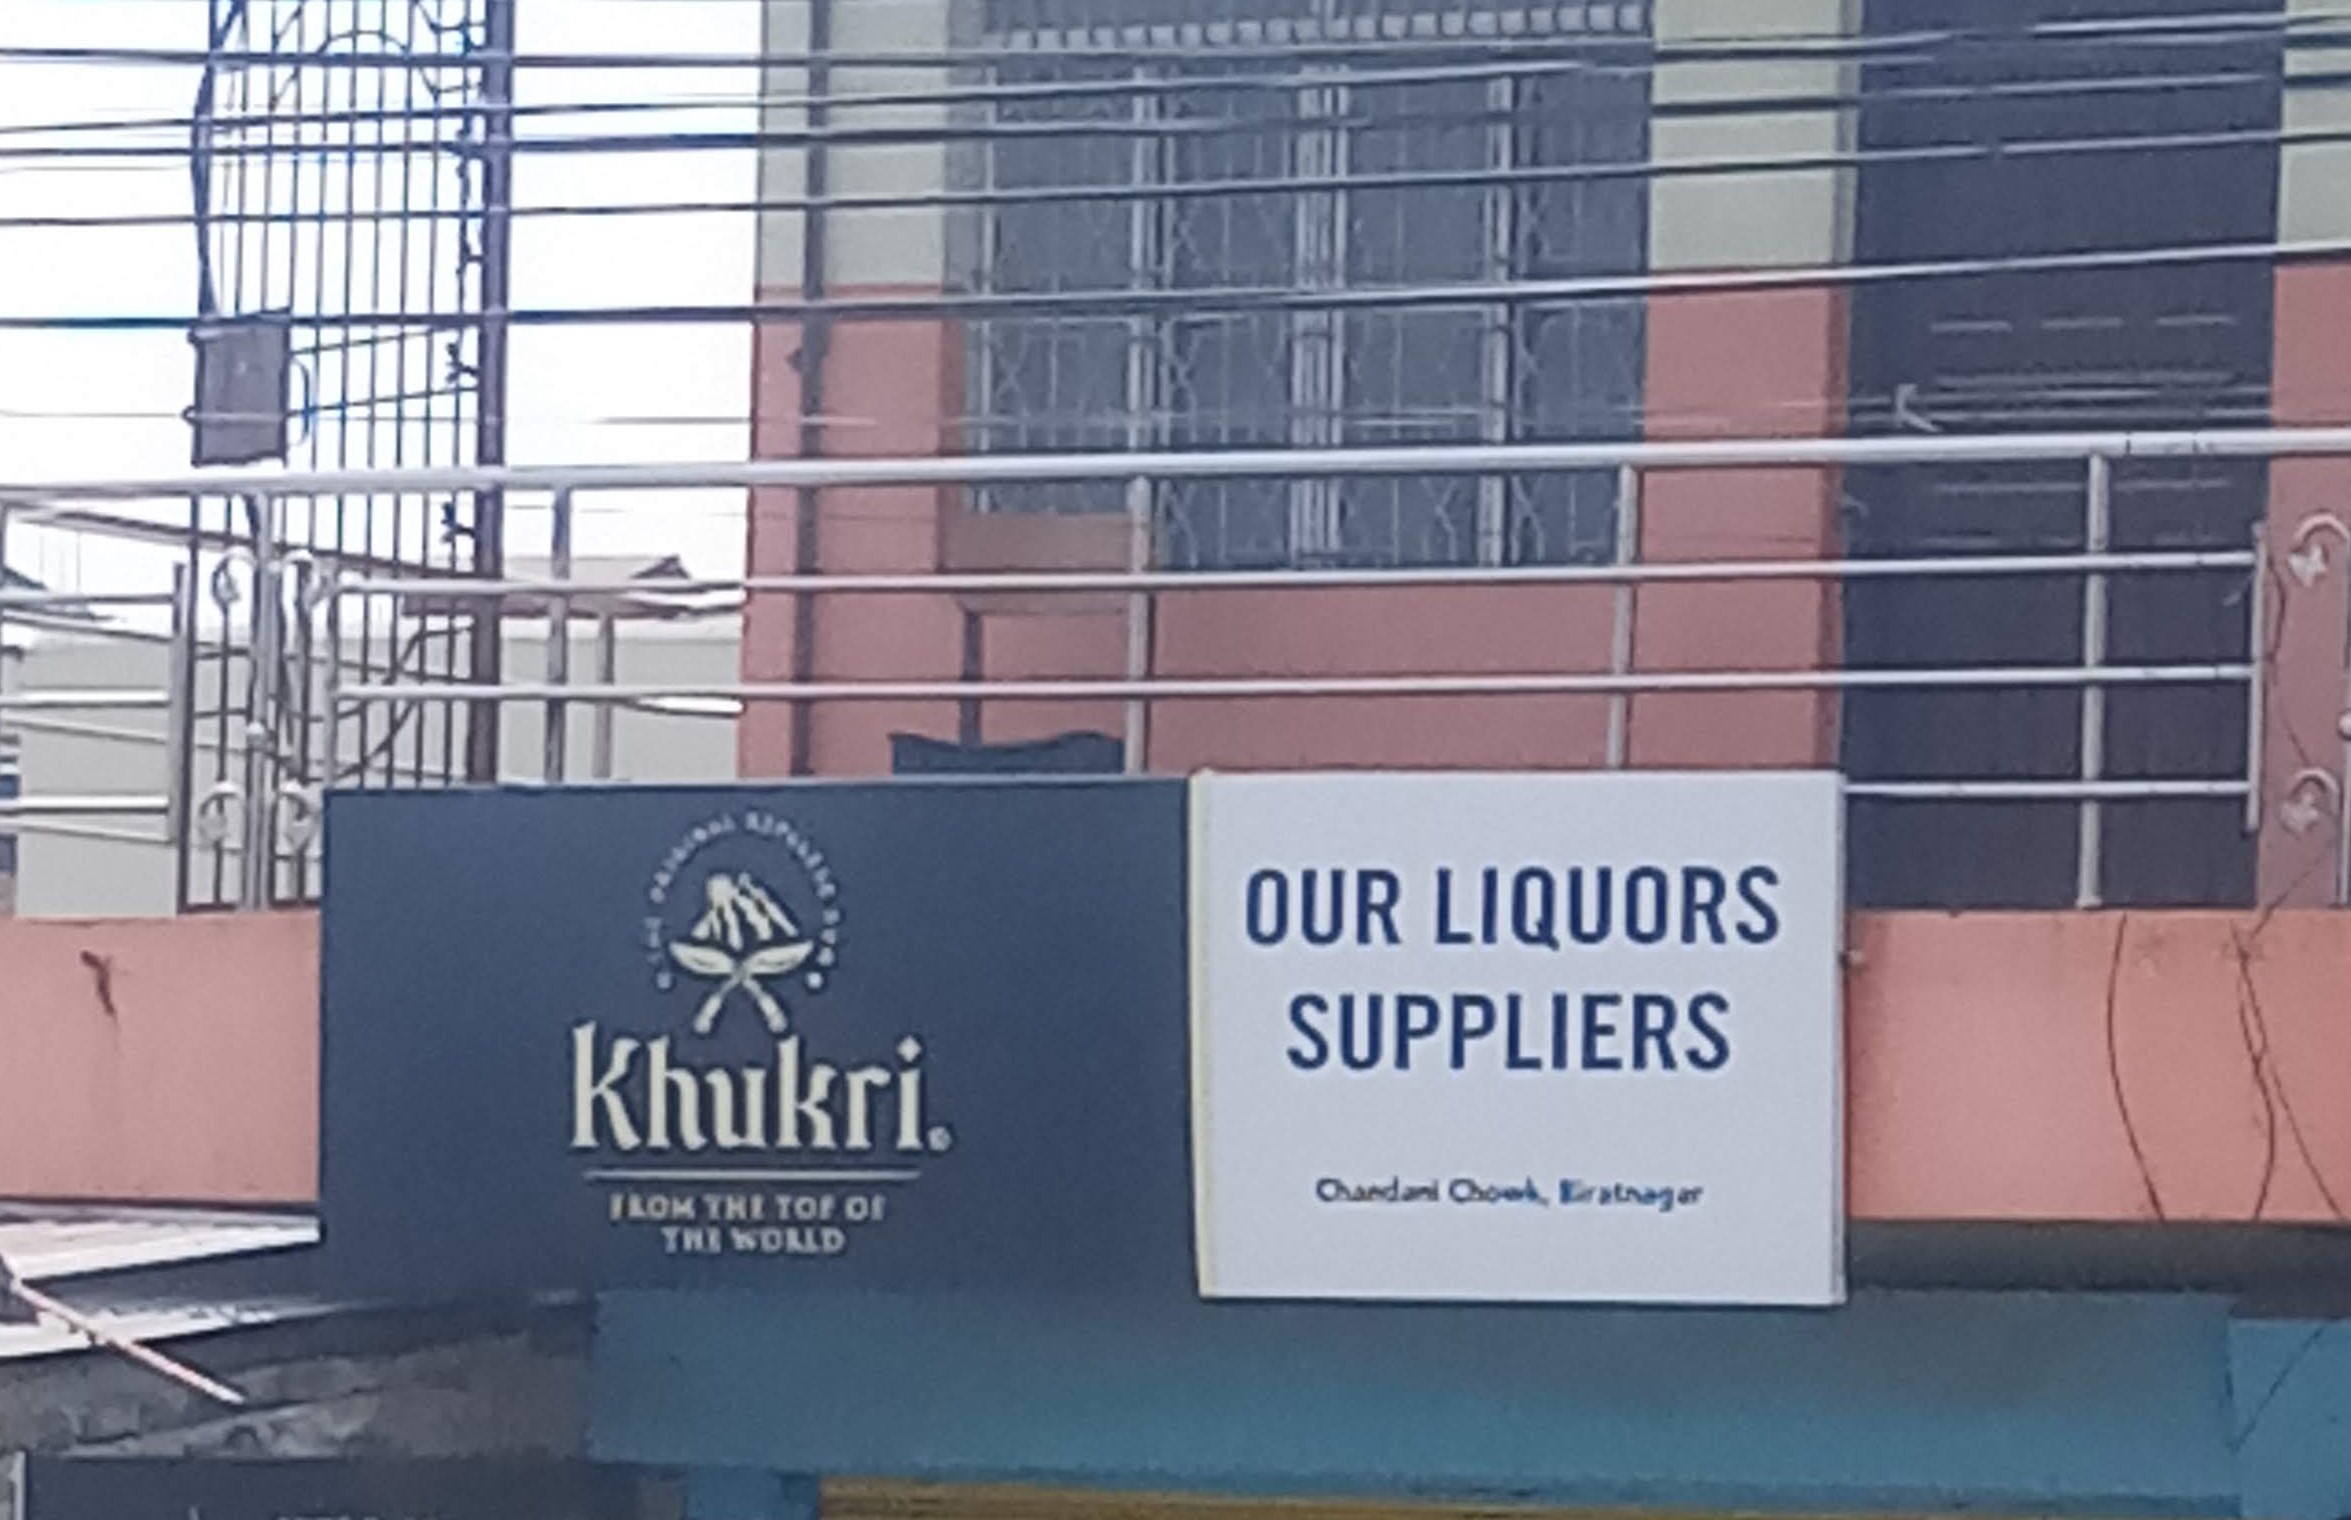 Our liquors and suppliers